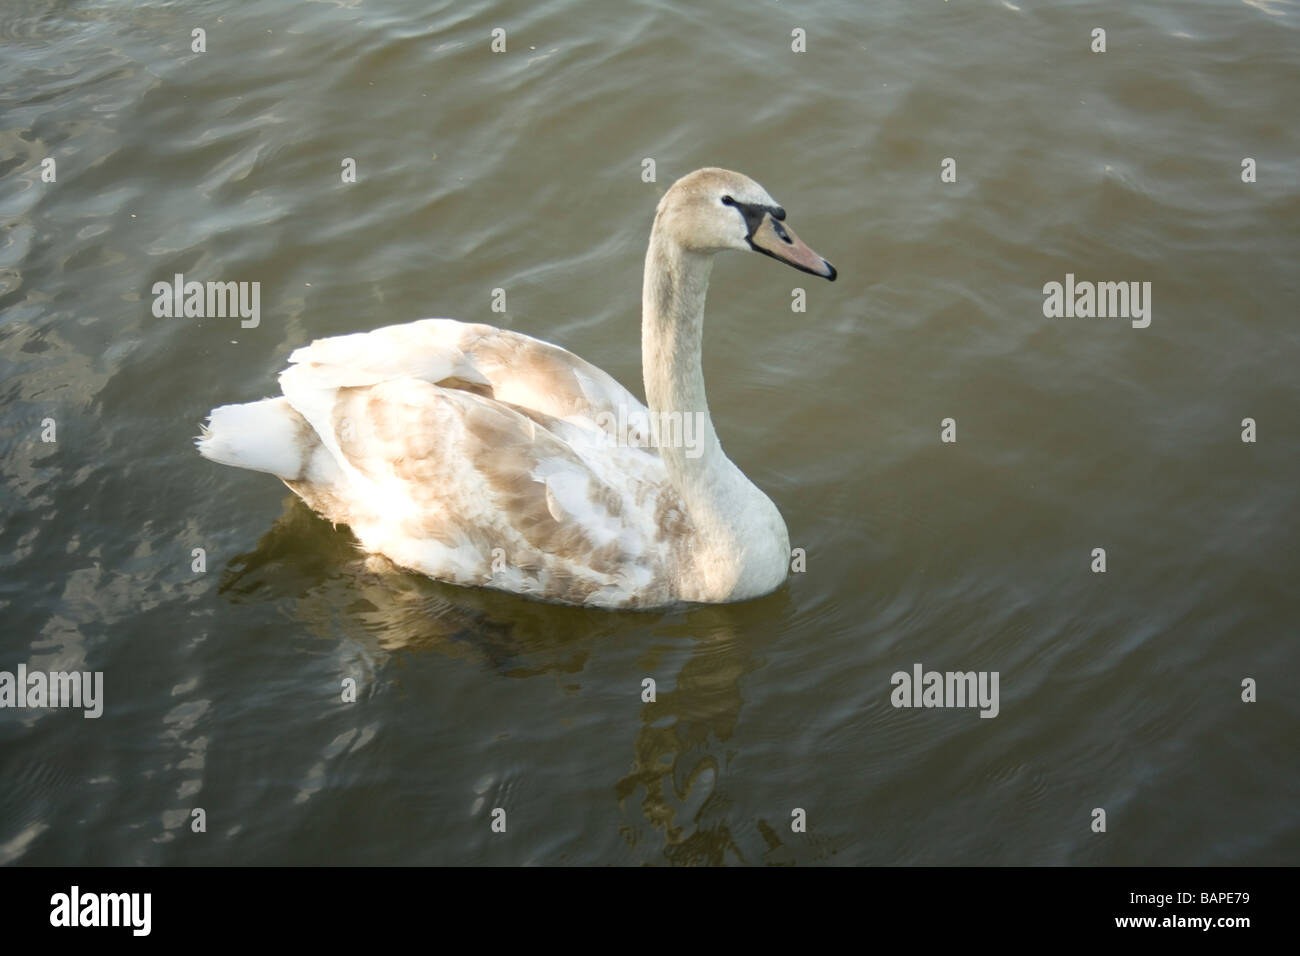 Young swan (sygnet) swimming Stock Photo